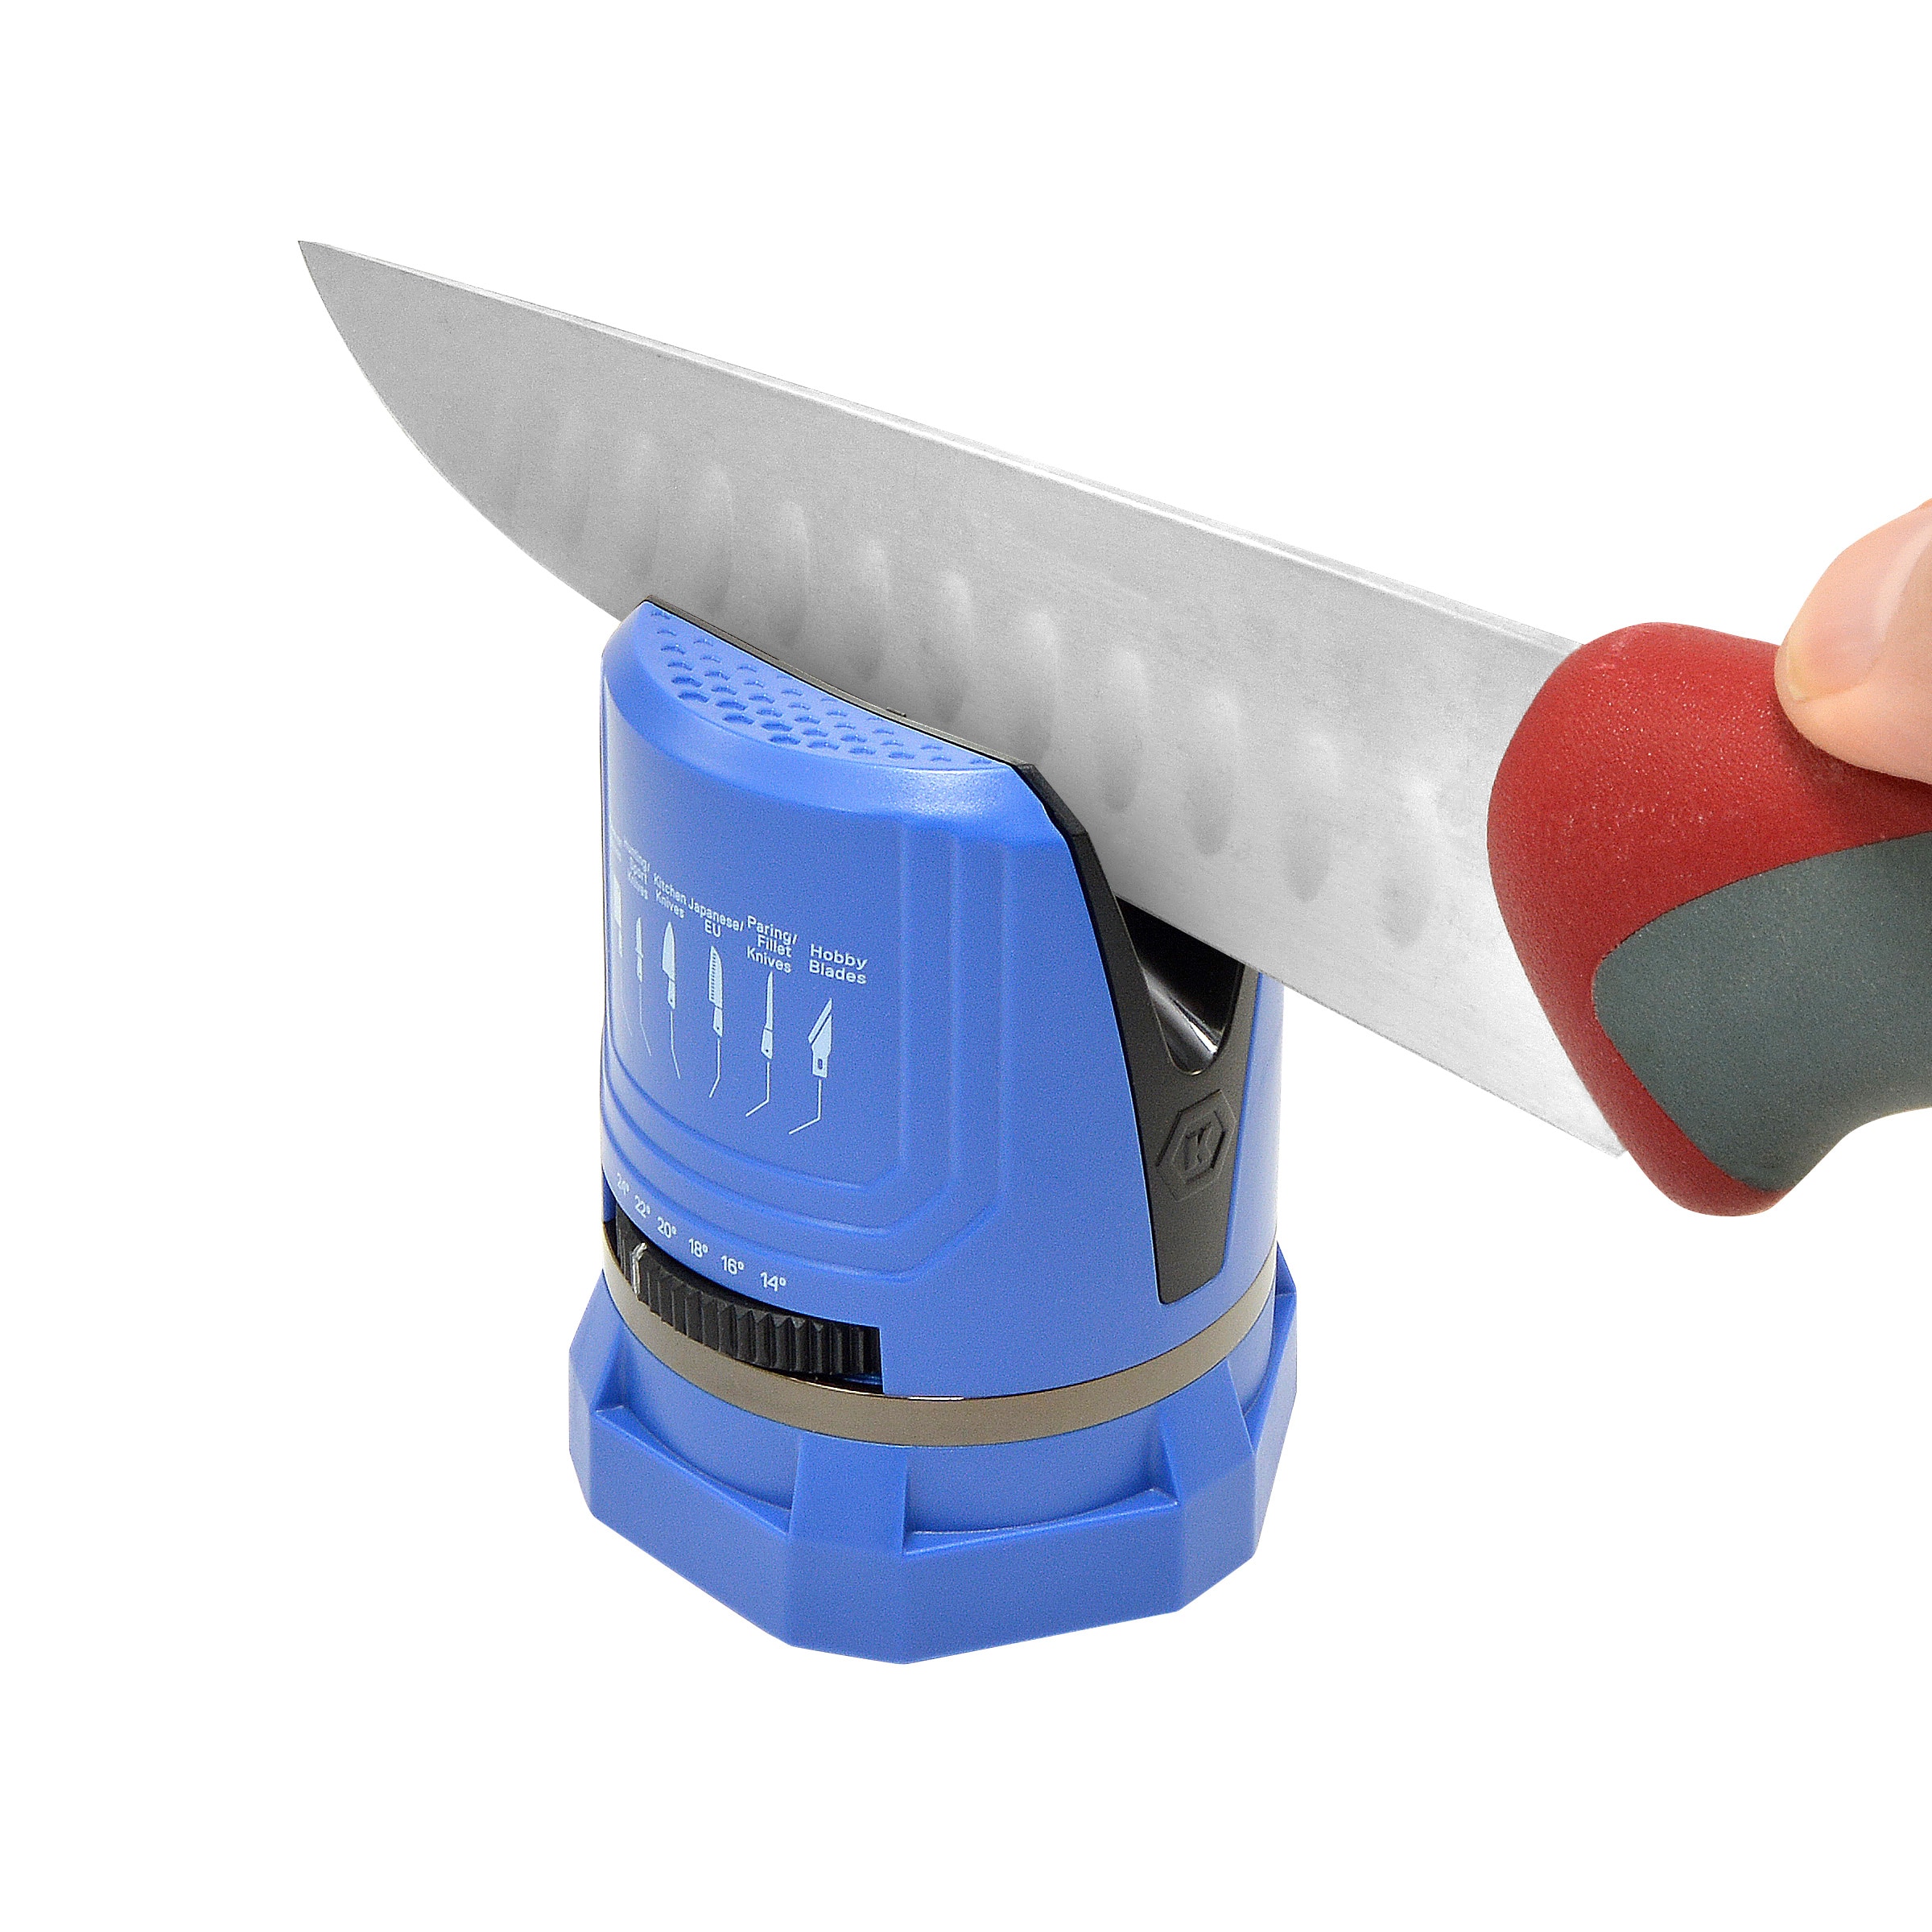 Knive Sharpener - Suction cap fixation safety